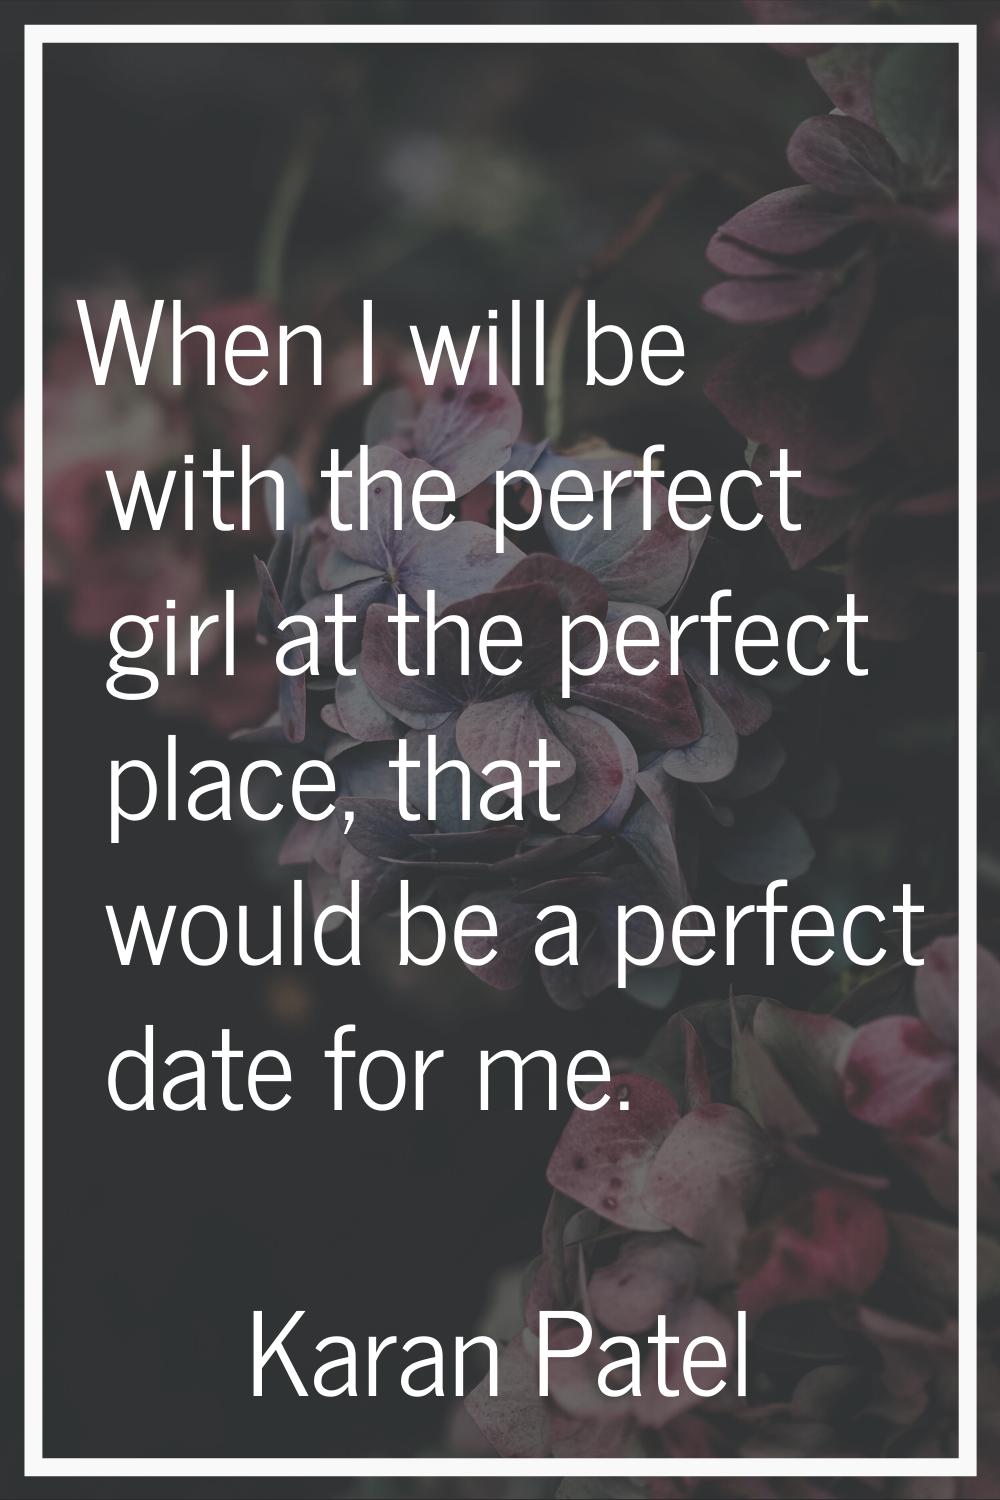 When I will be with the perfect girl at the perfect place, that would be a perfect date for me.